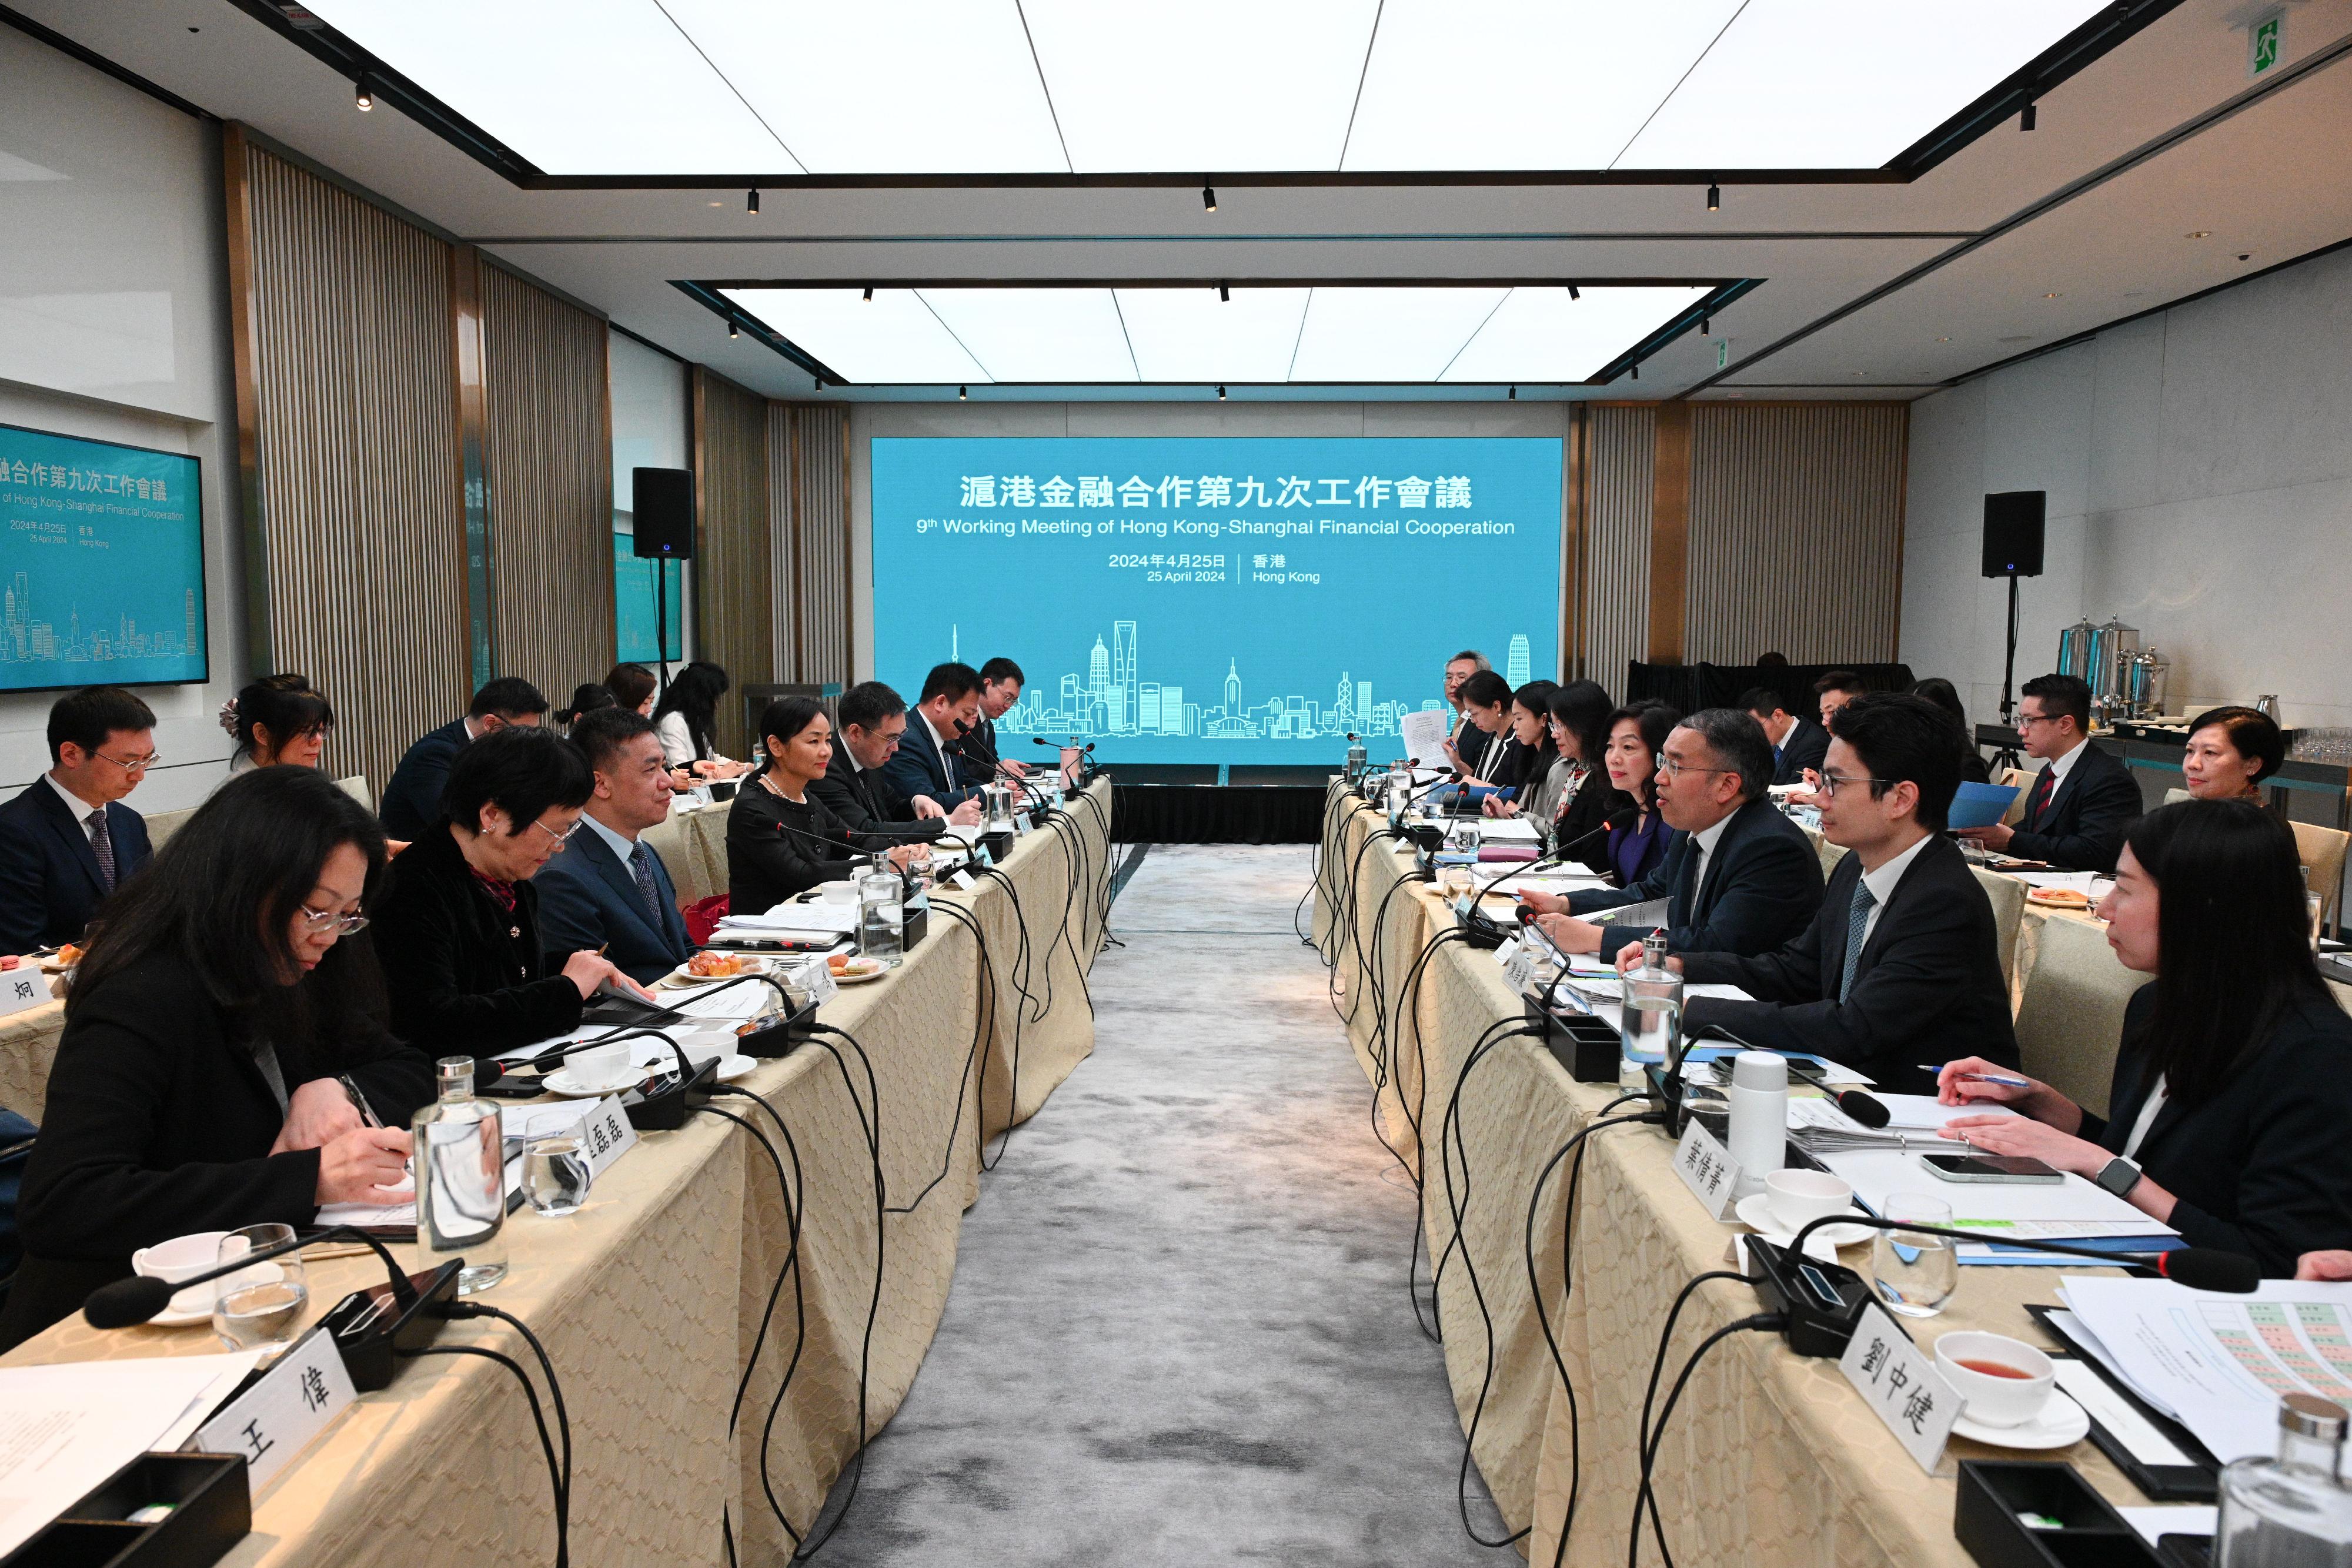 The Secretary for Financial Services and the Treasury, Mr Christopher Hui (third right), and the Director-General of the Shanghai Office for Advancing International Financial Center Development, Mr Zhou Xiaoquan (third left), held the ninth Working Meeting of Hong Kong-Shanghai Financial Co-operation in Hong Kong today (April 25). Photo shows representatives of government bodies, financial regulators and exchanges of the two places discussing how to further enhance financial co-operation between Hong Kong and Shanghai.